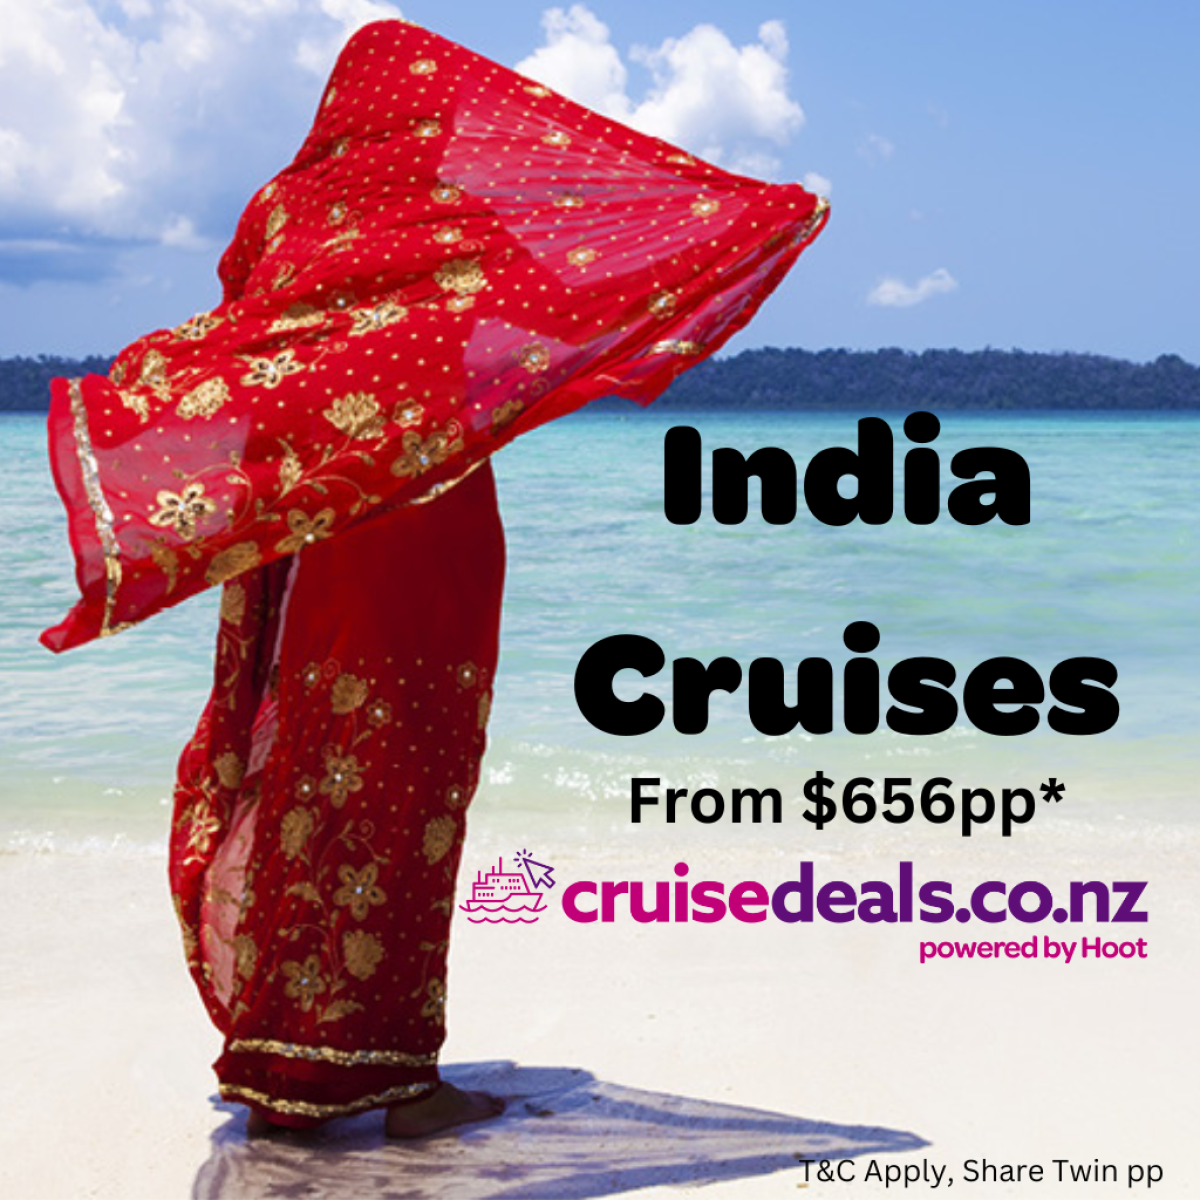 Incredible India Cruises with Costa